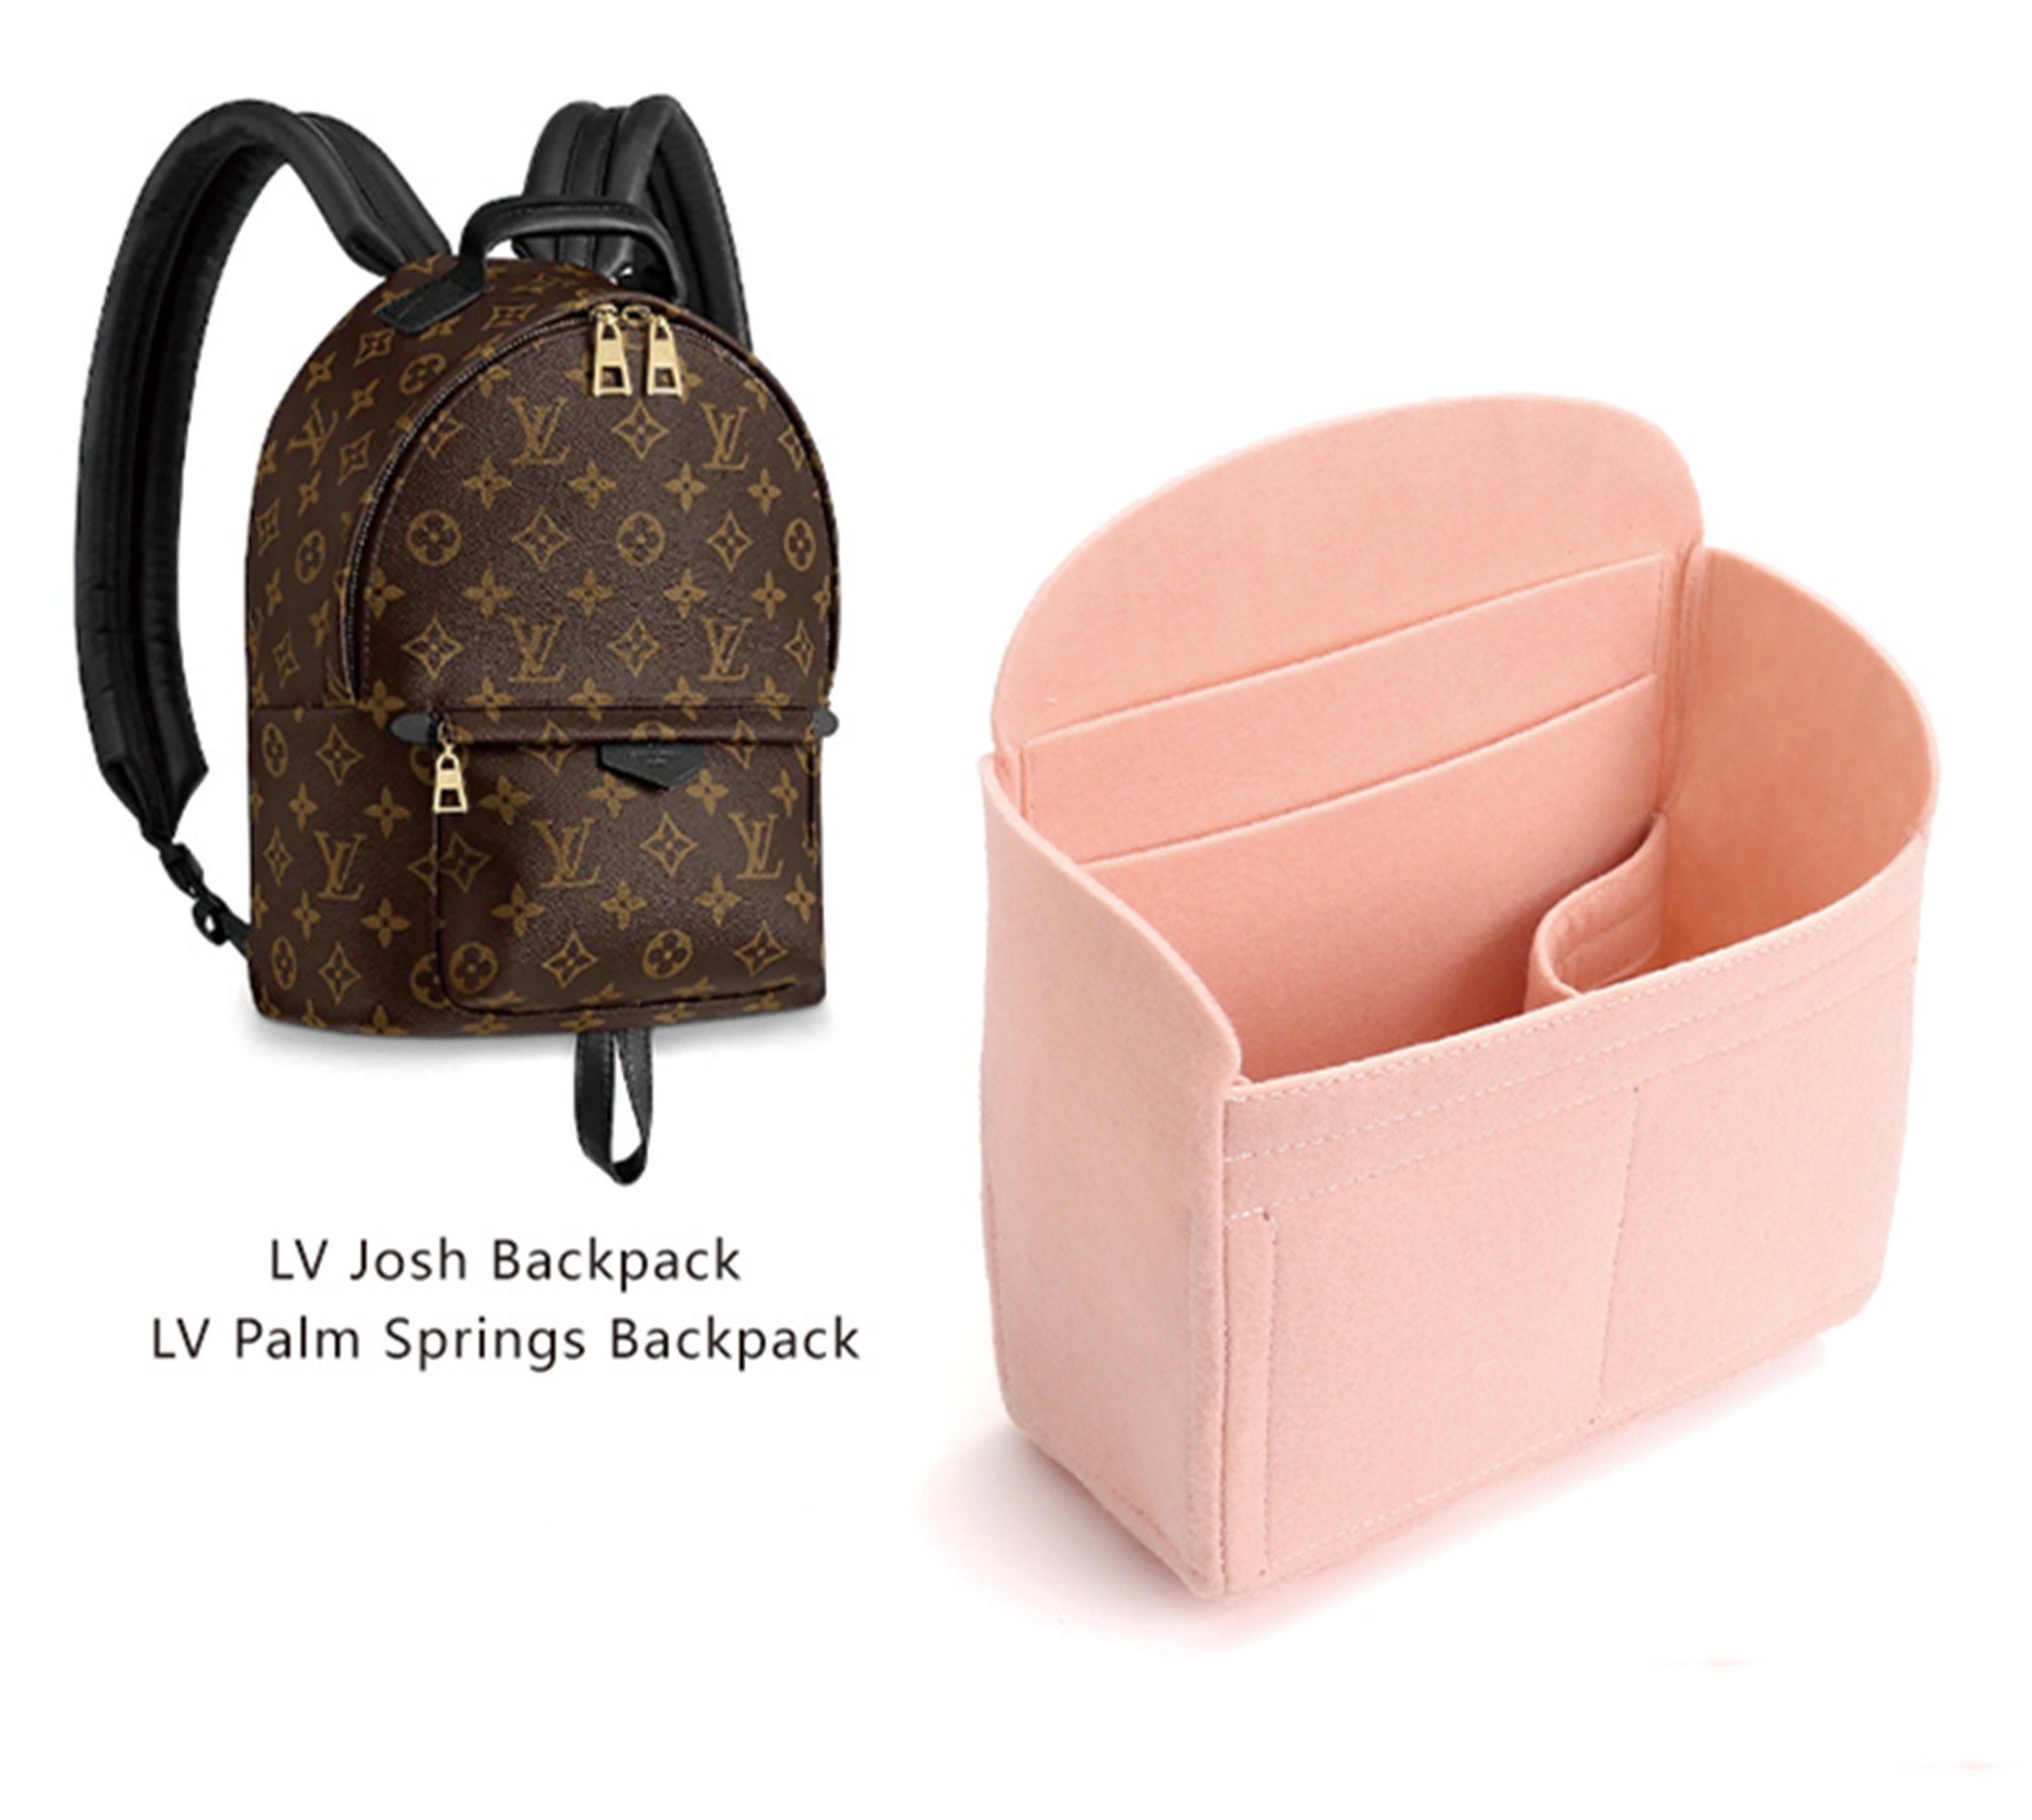 Backpack Organizer for Palm Springs PM and Palm Springs MM